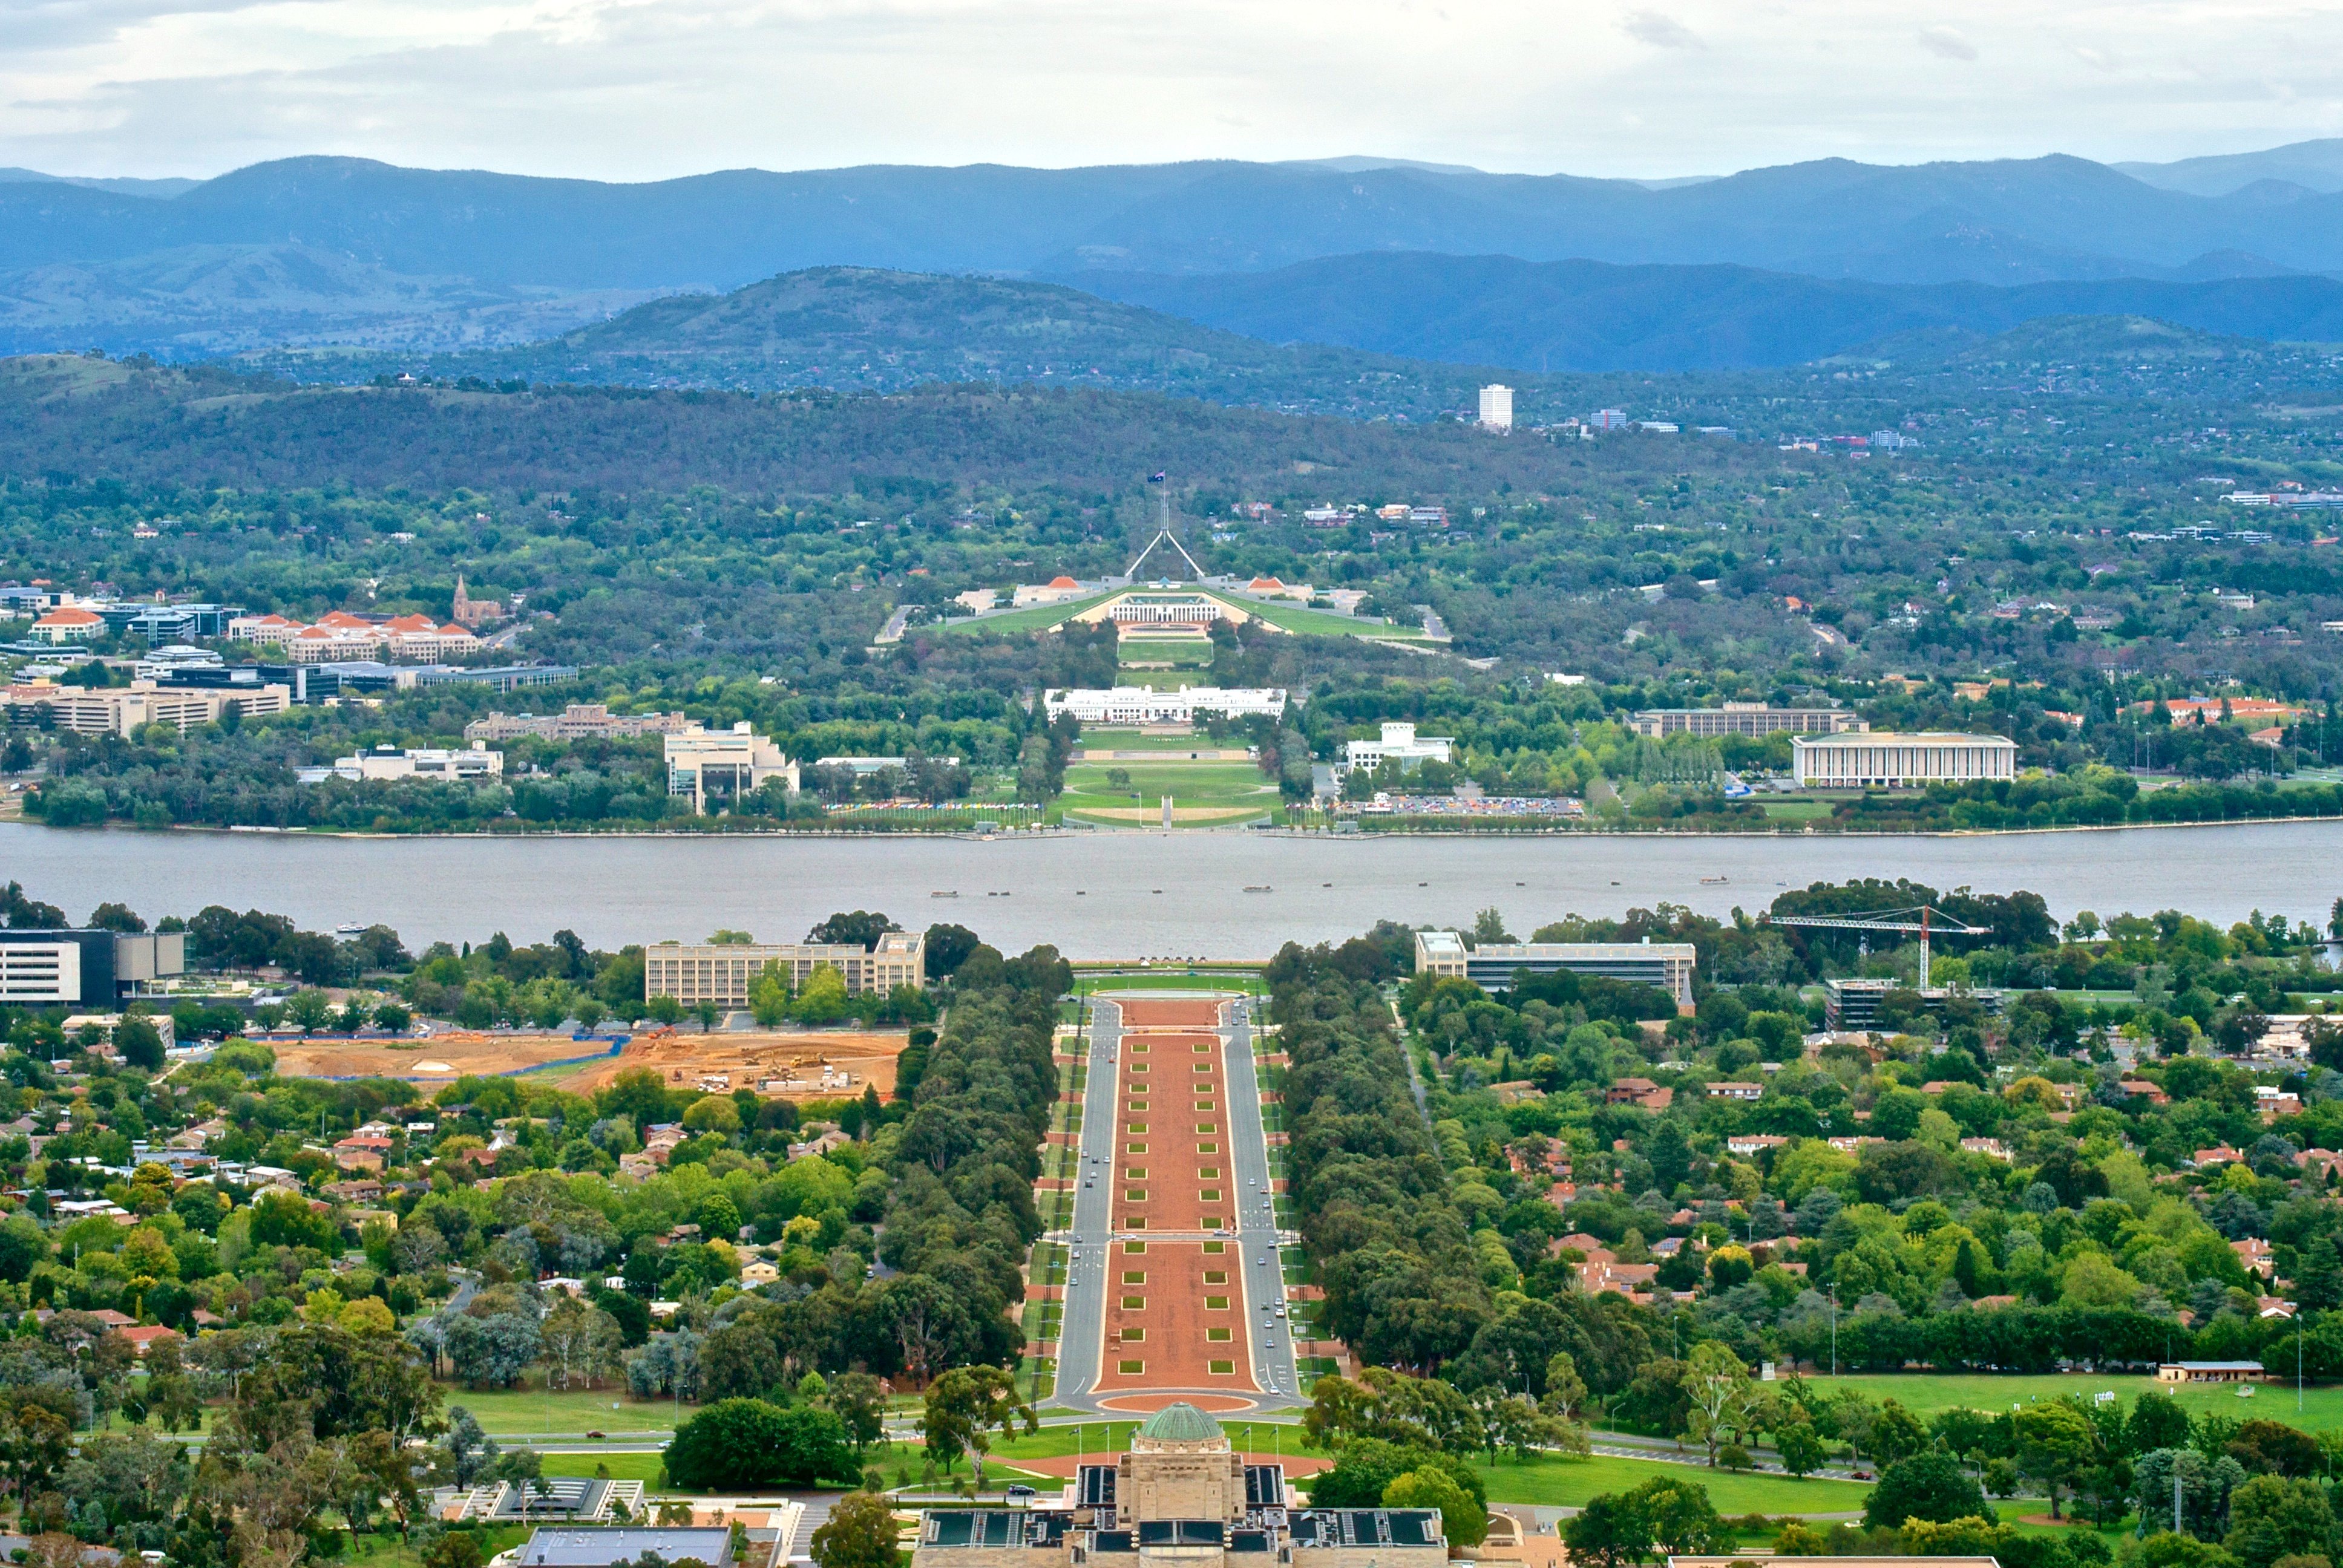 Canberra_viewed_from_Mount_Ainslie